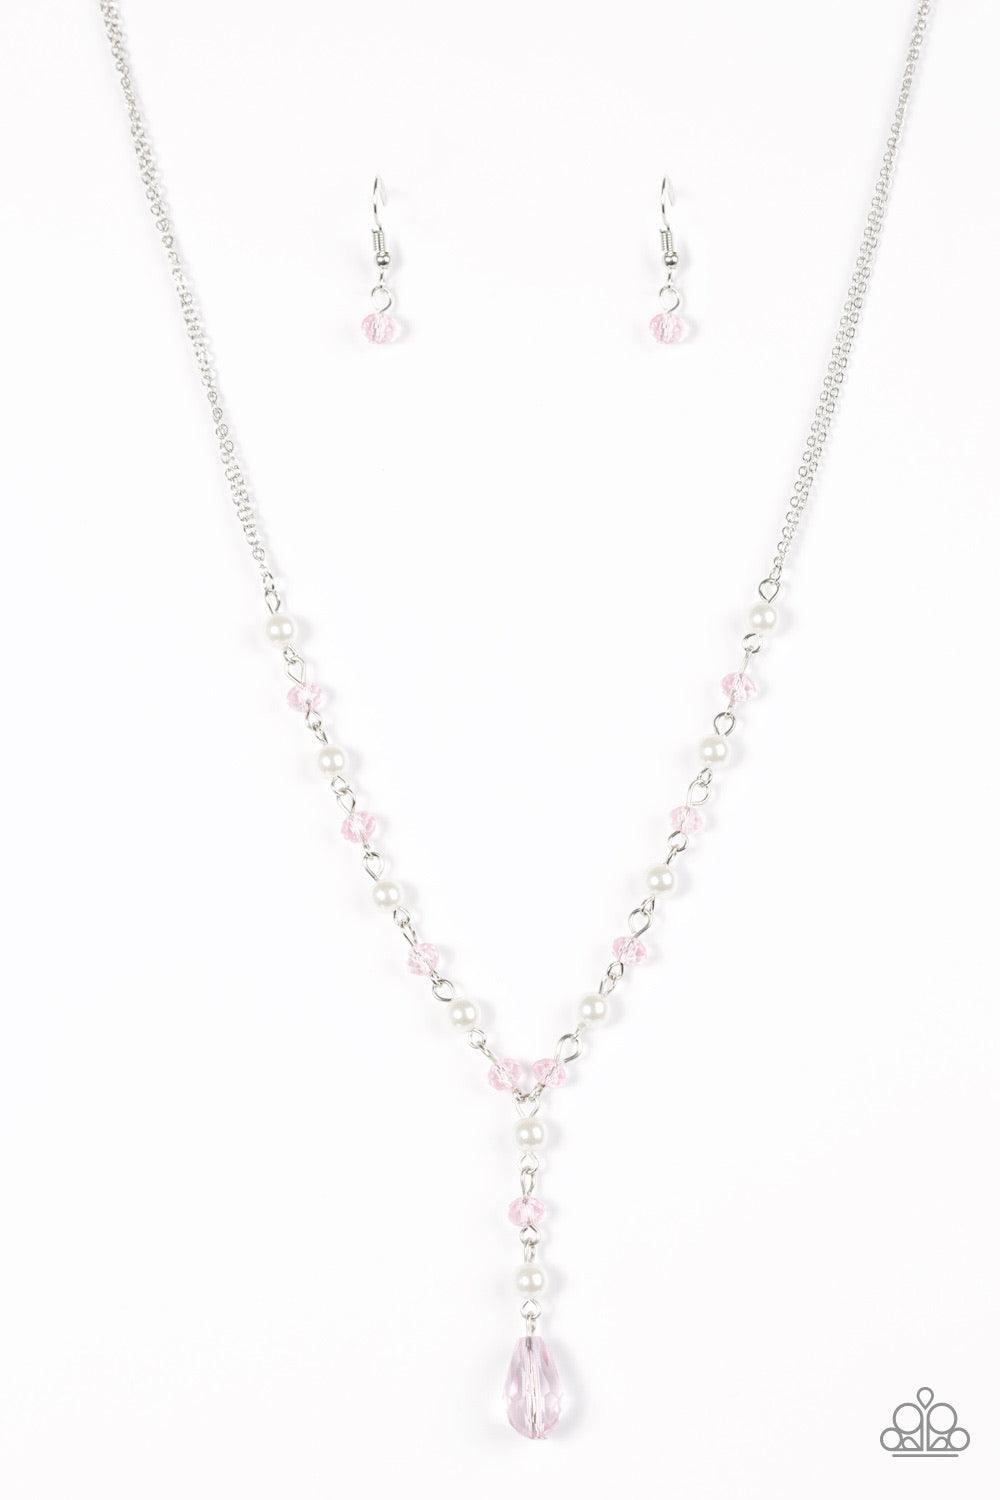 Diva Deluxe ~Pink - Beautifully Blinged